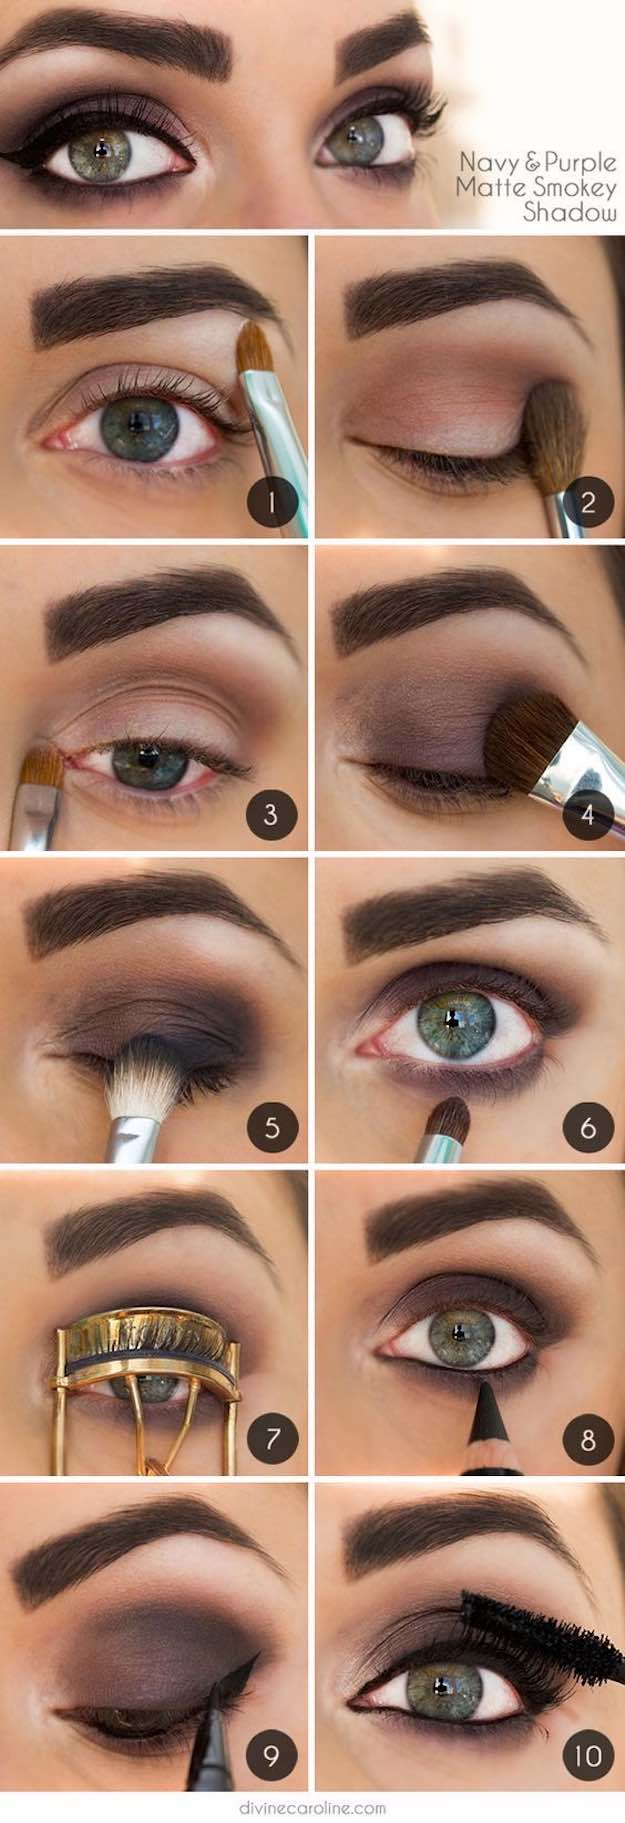 Day Makeup Brown Eyes 50 Perfect Makeup Tutorials For Green Eyes The Goddess